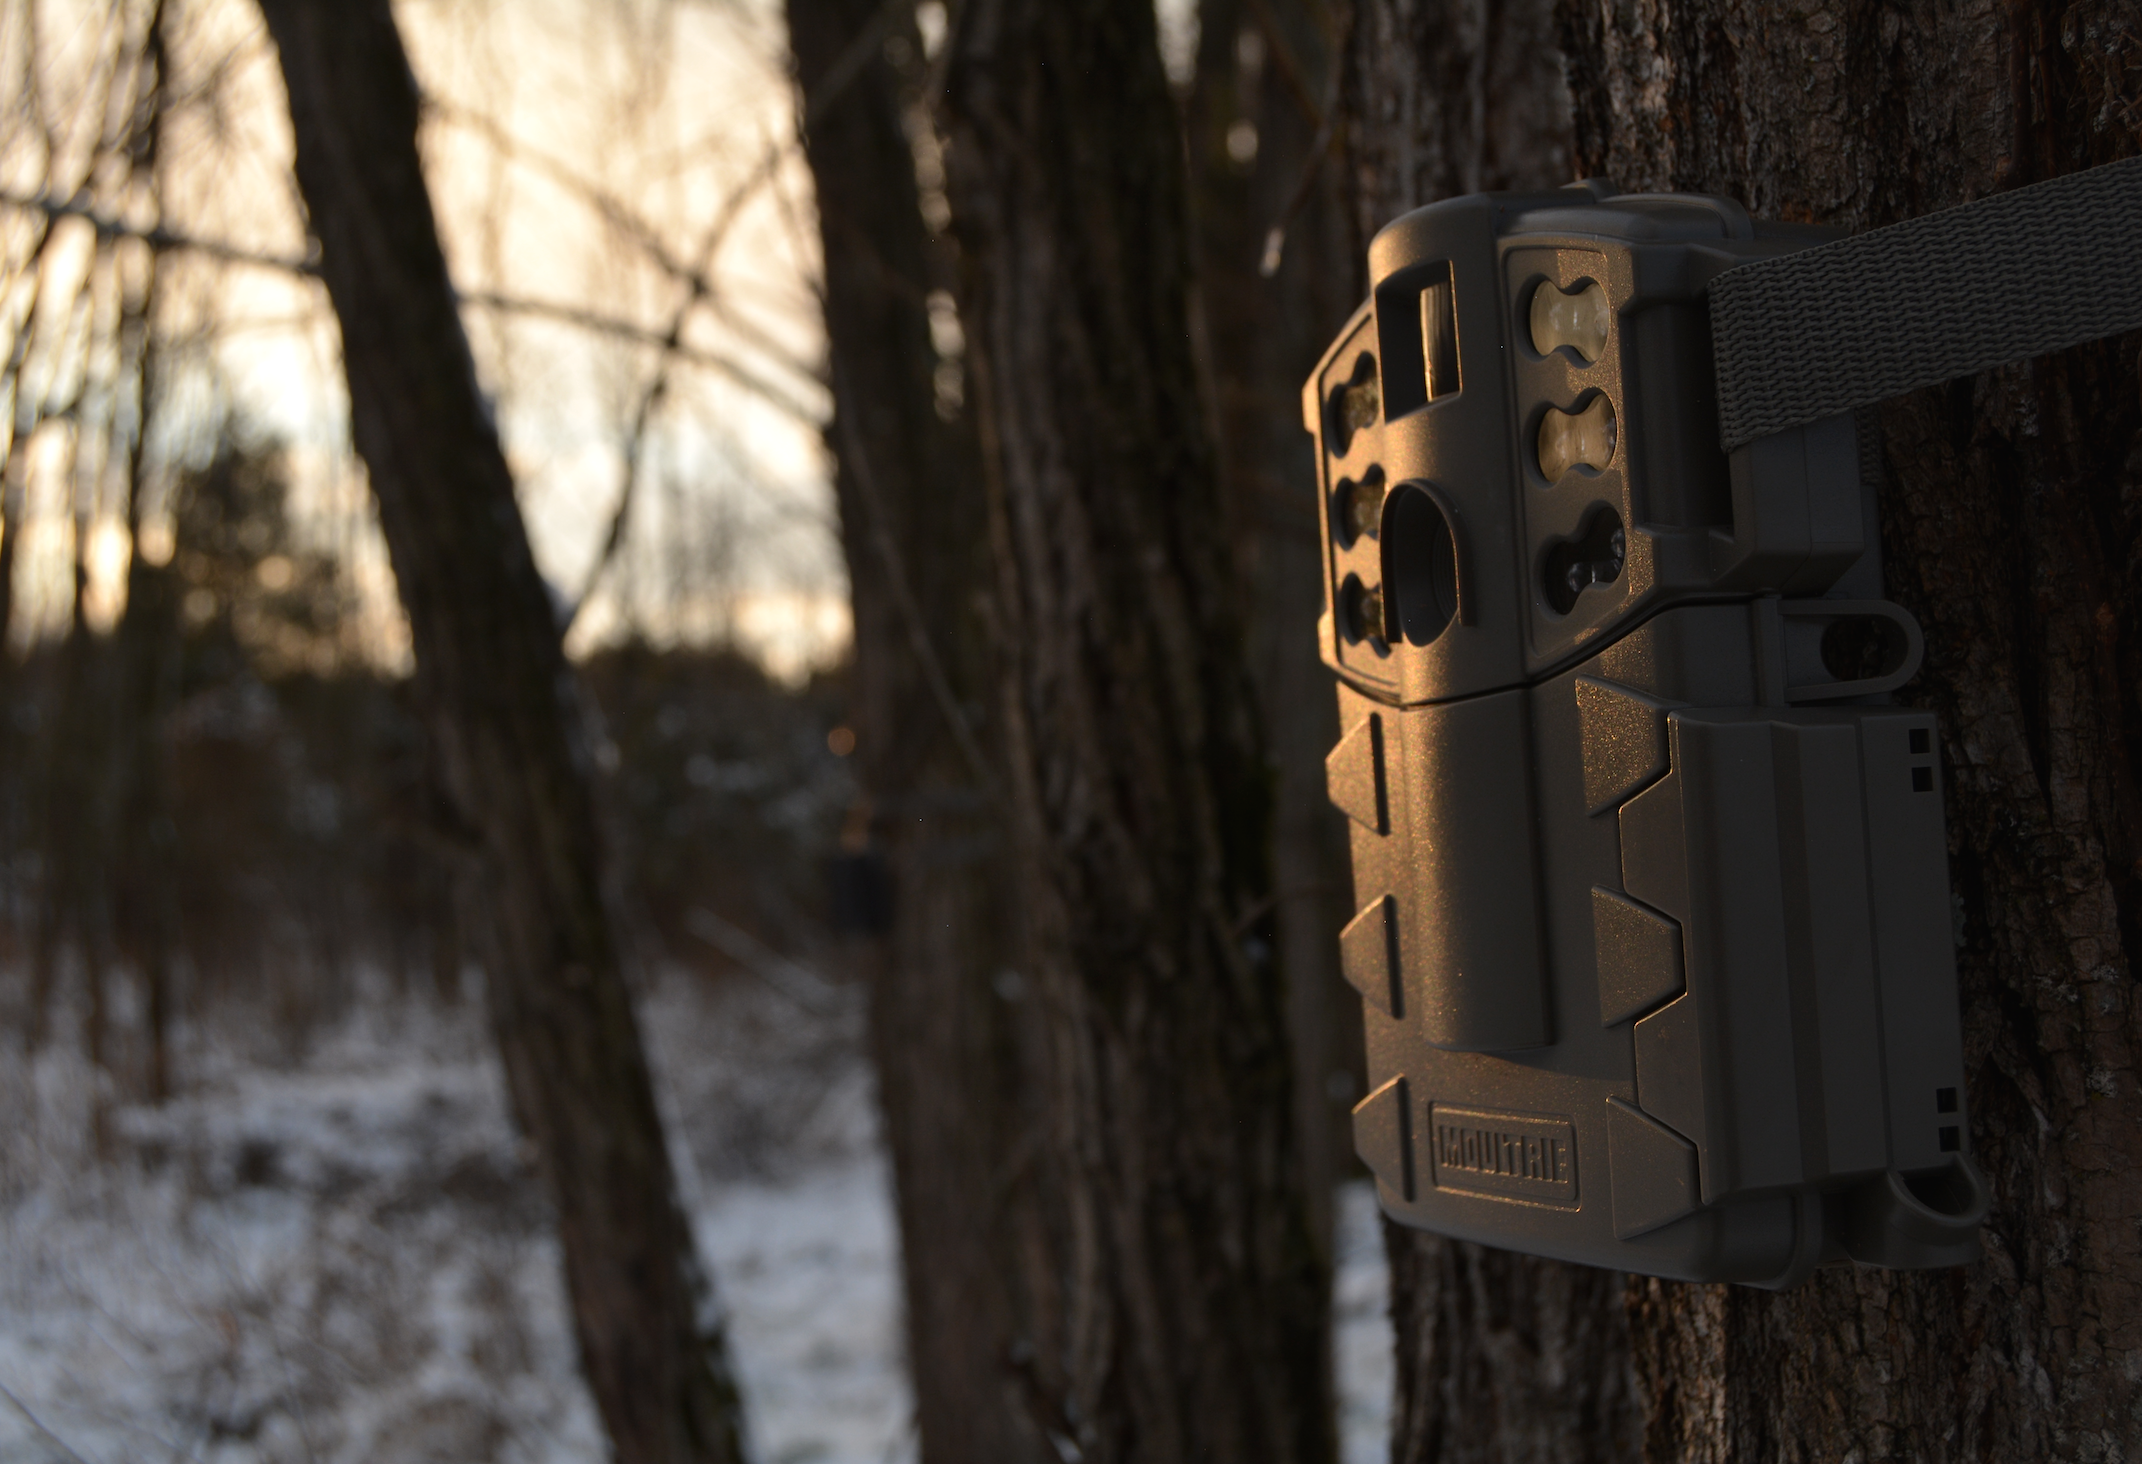 When deer season ends, don't despair. Get into the woods to scout and use your game cameras for surveying does and bucks to see what survived the season.